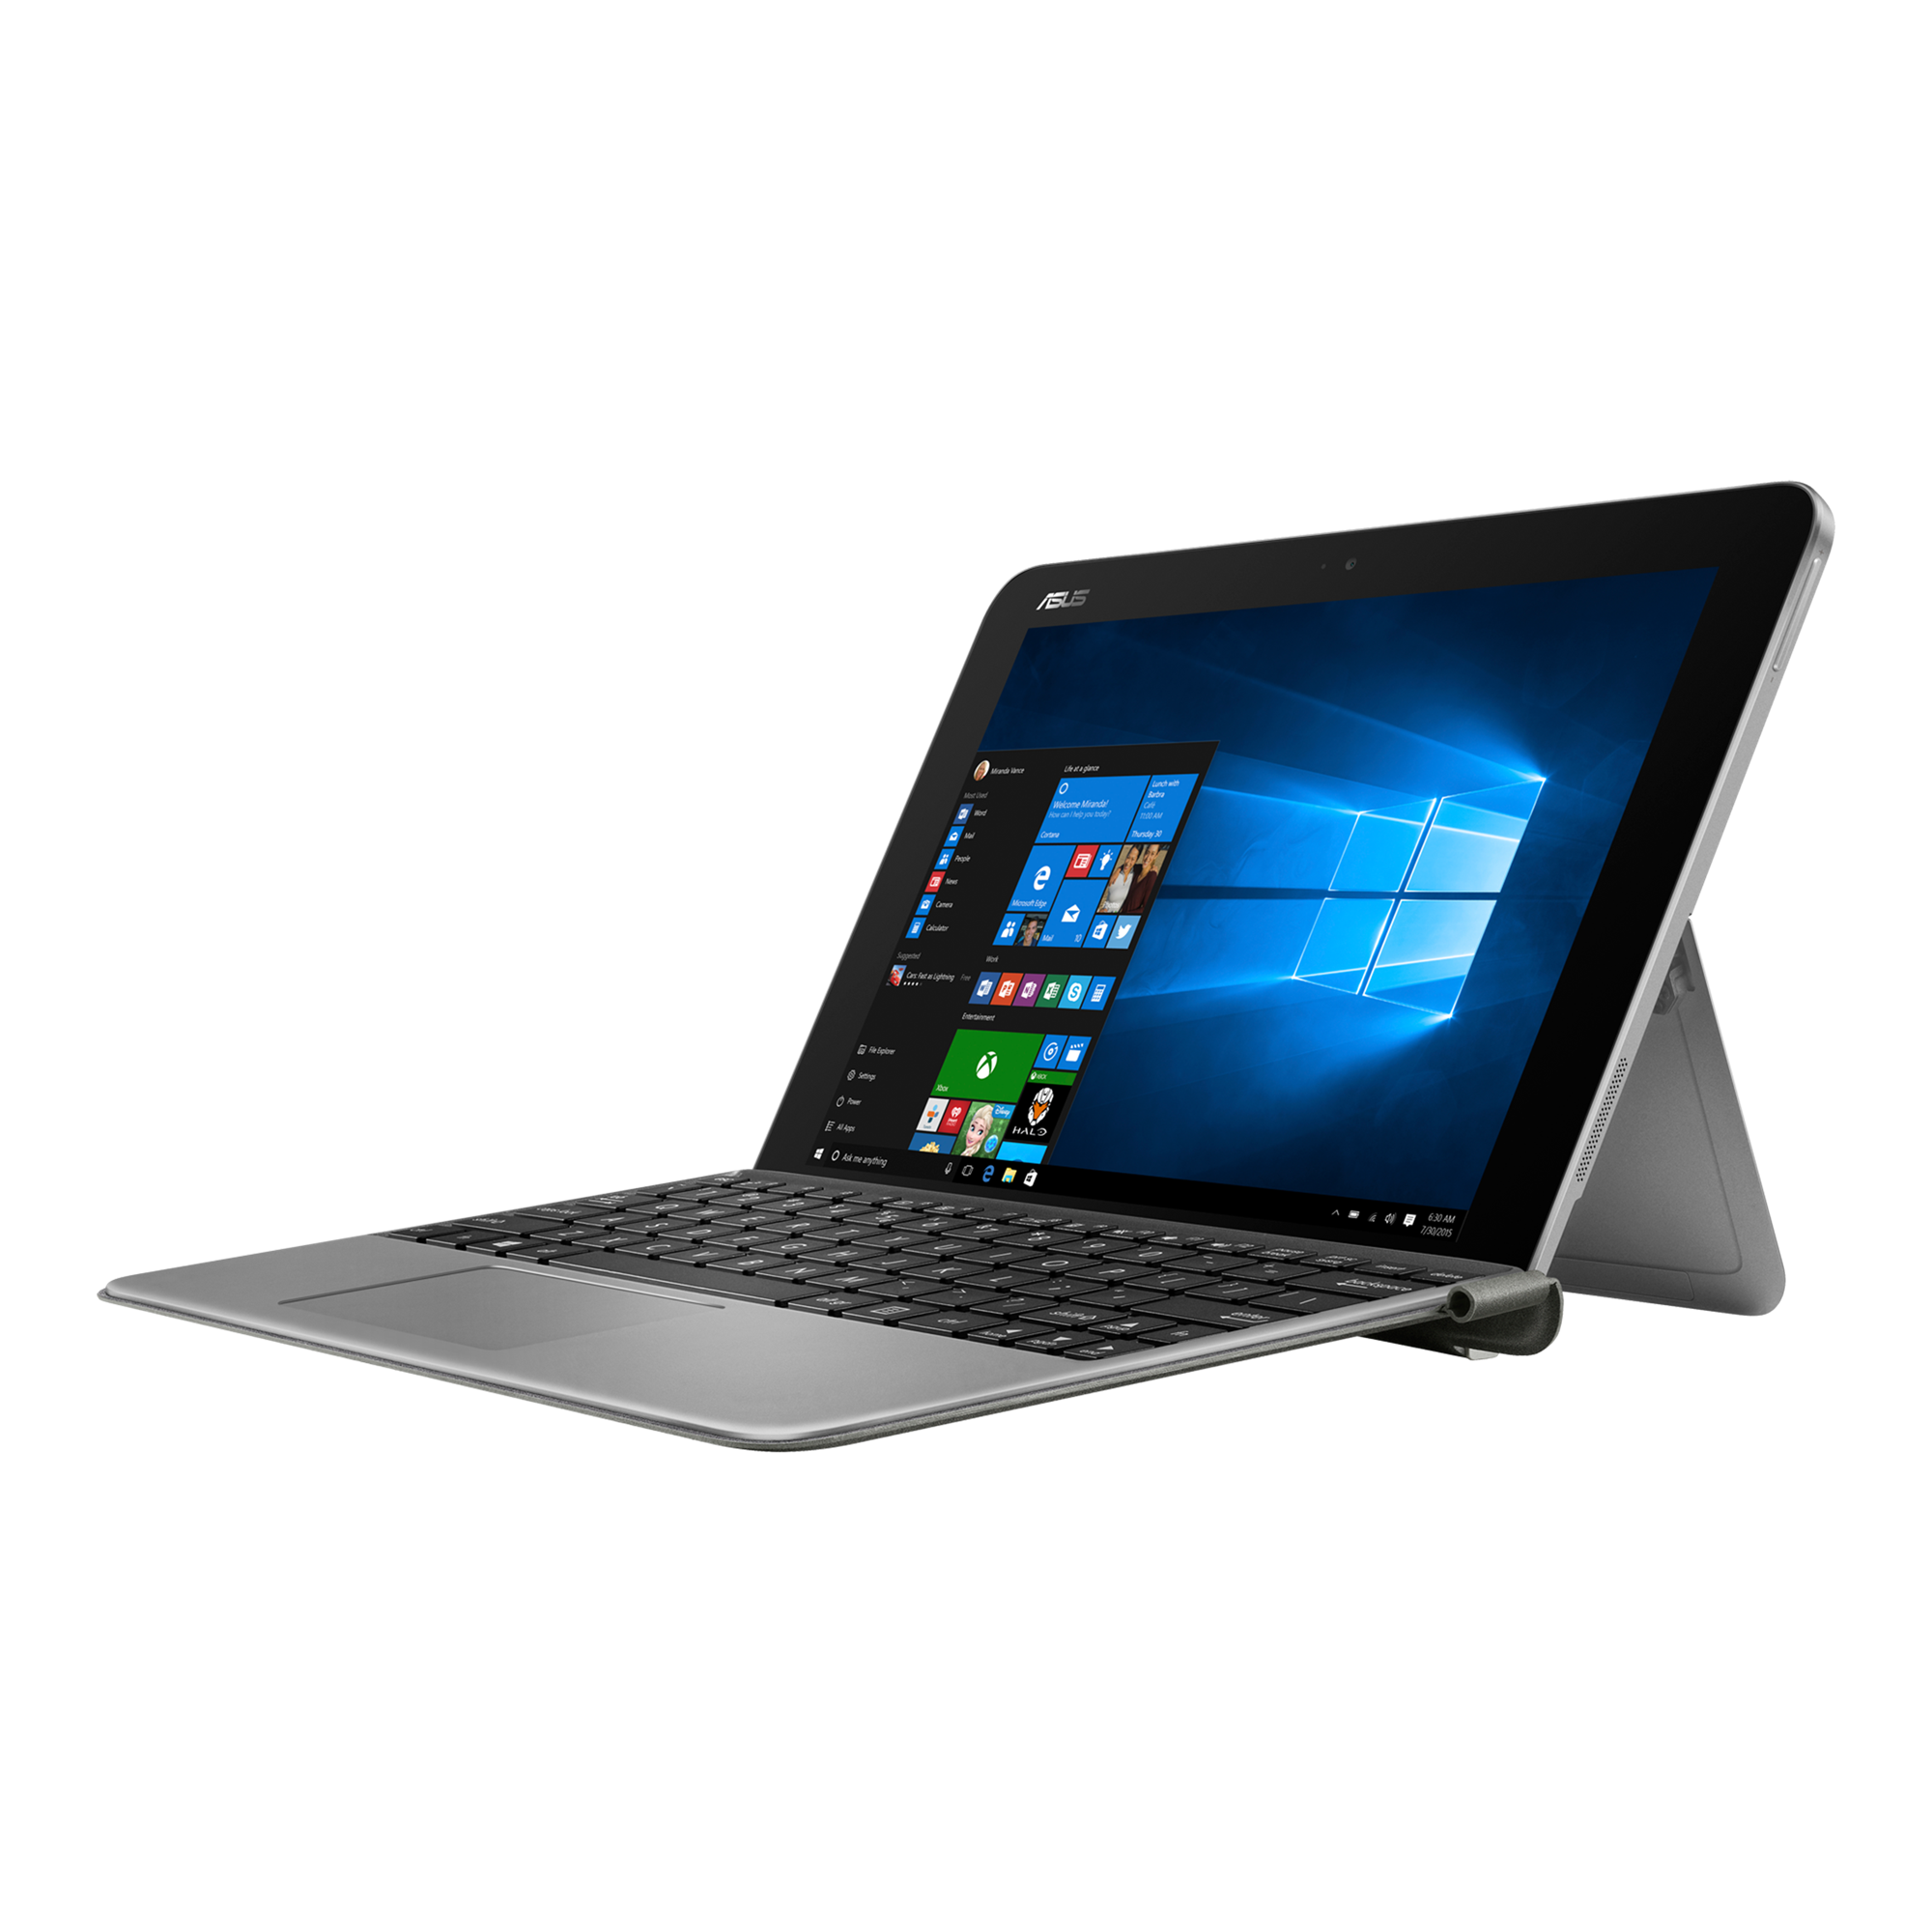 ASUS Transformer Mini T102｜Laptops For Home｜ASUS Canada